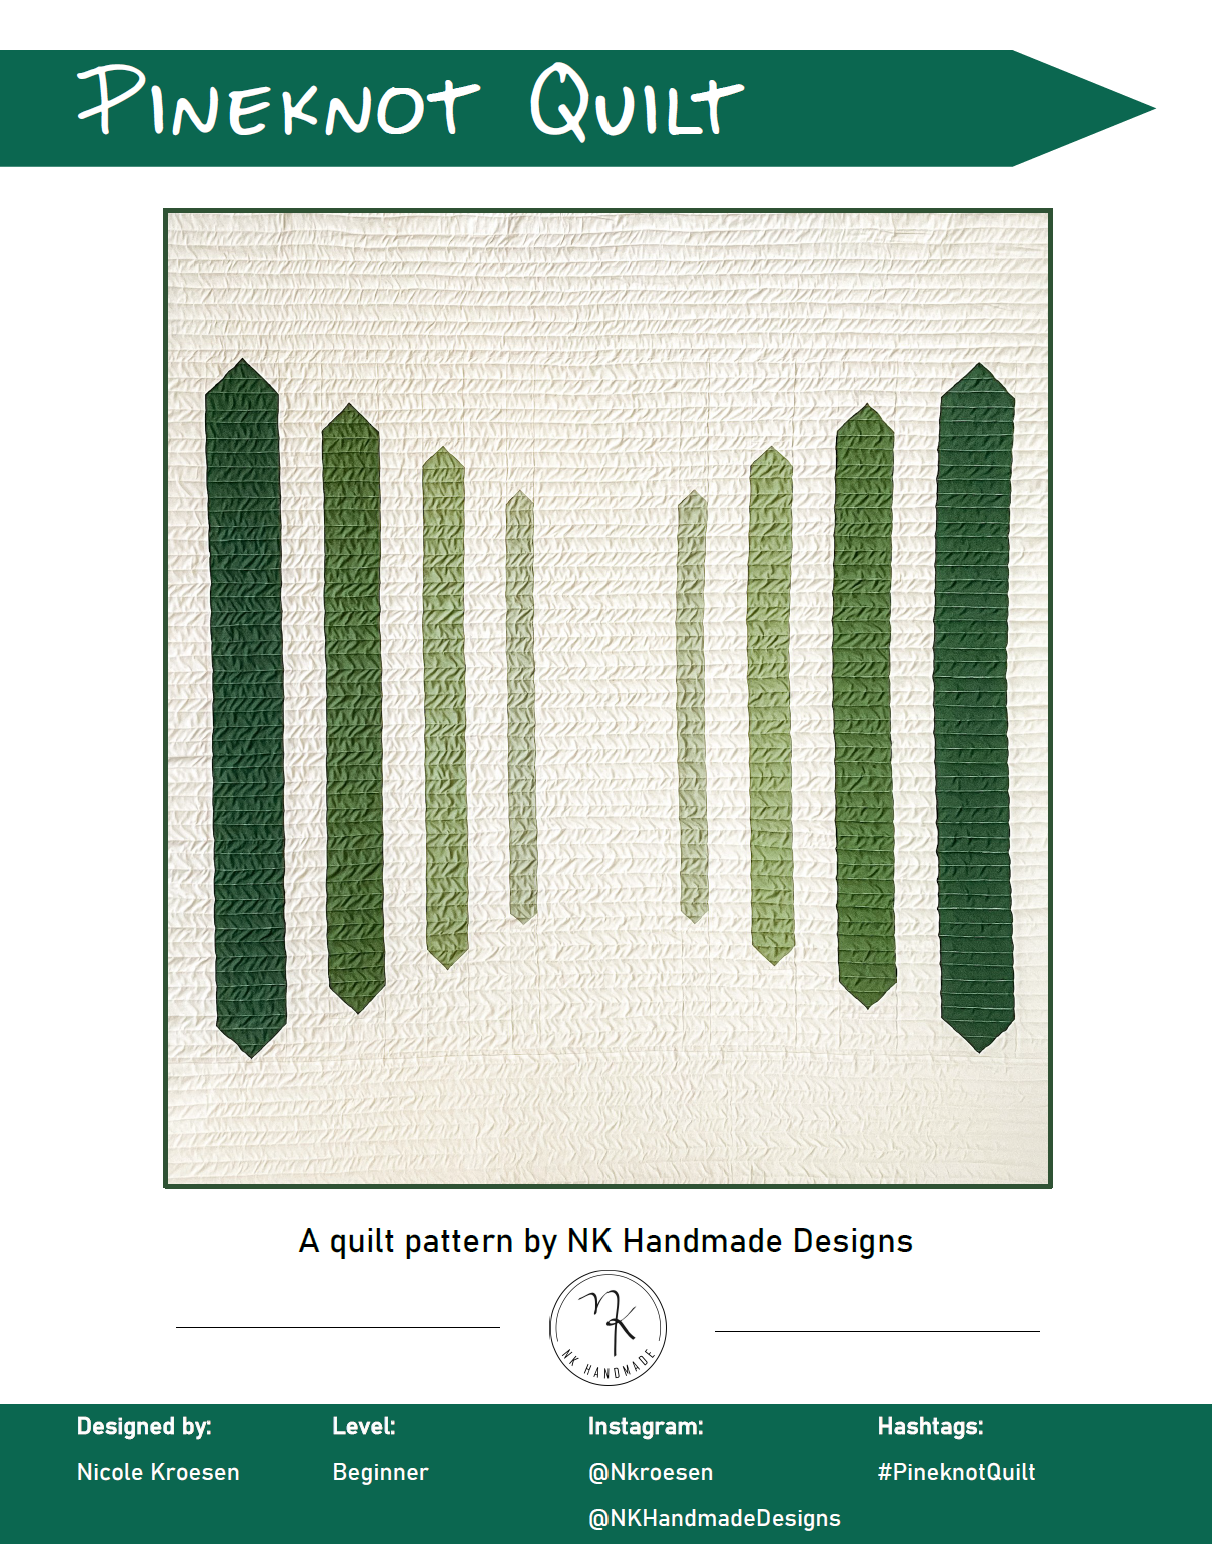 Cover image of the Pineknot quilt - a modern wuilt with a gradient of green vertical stripes